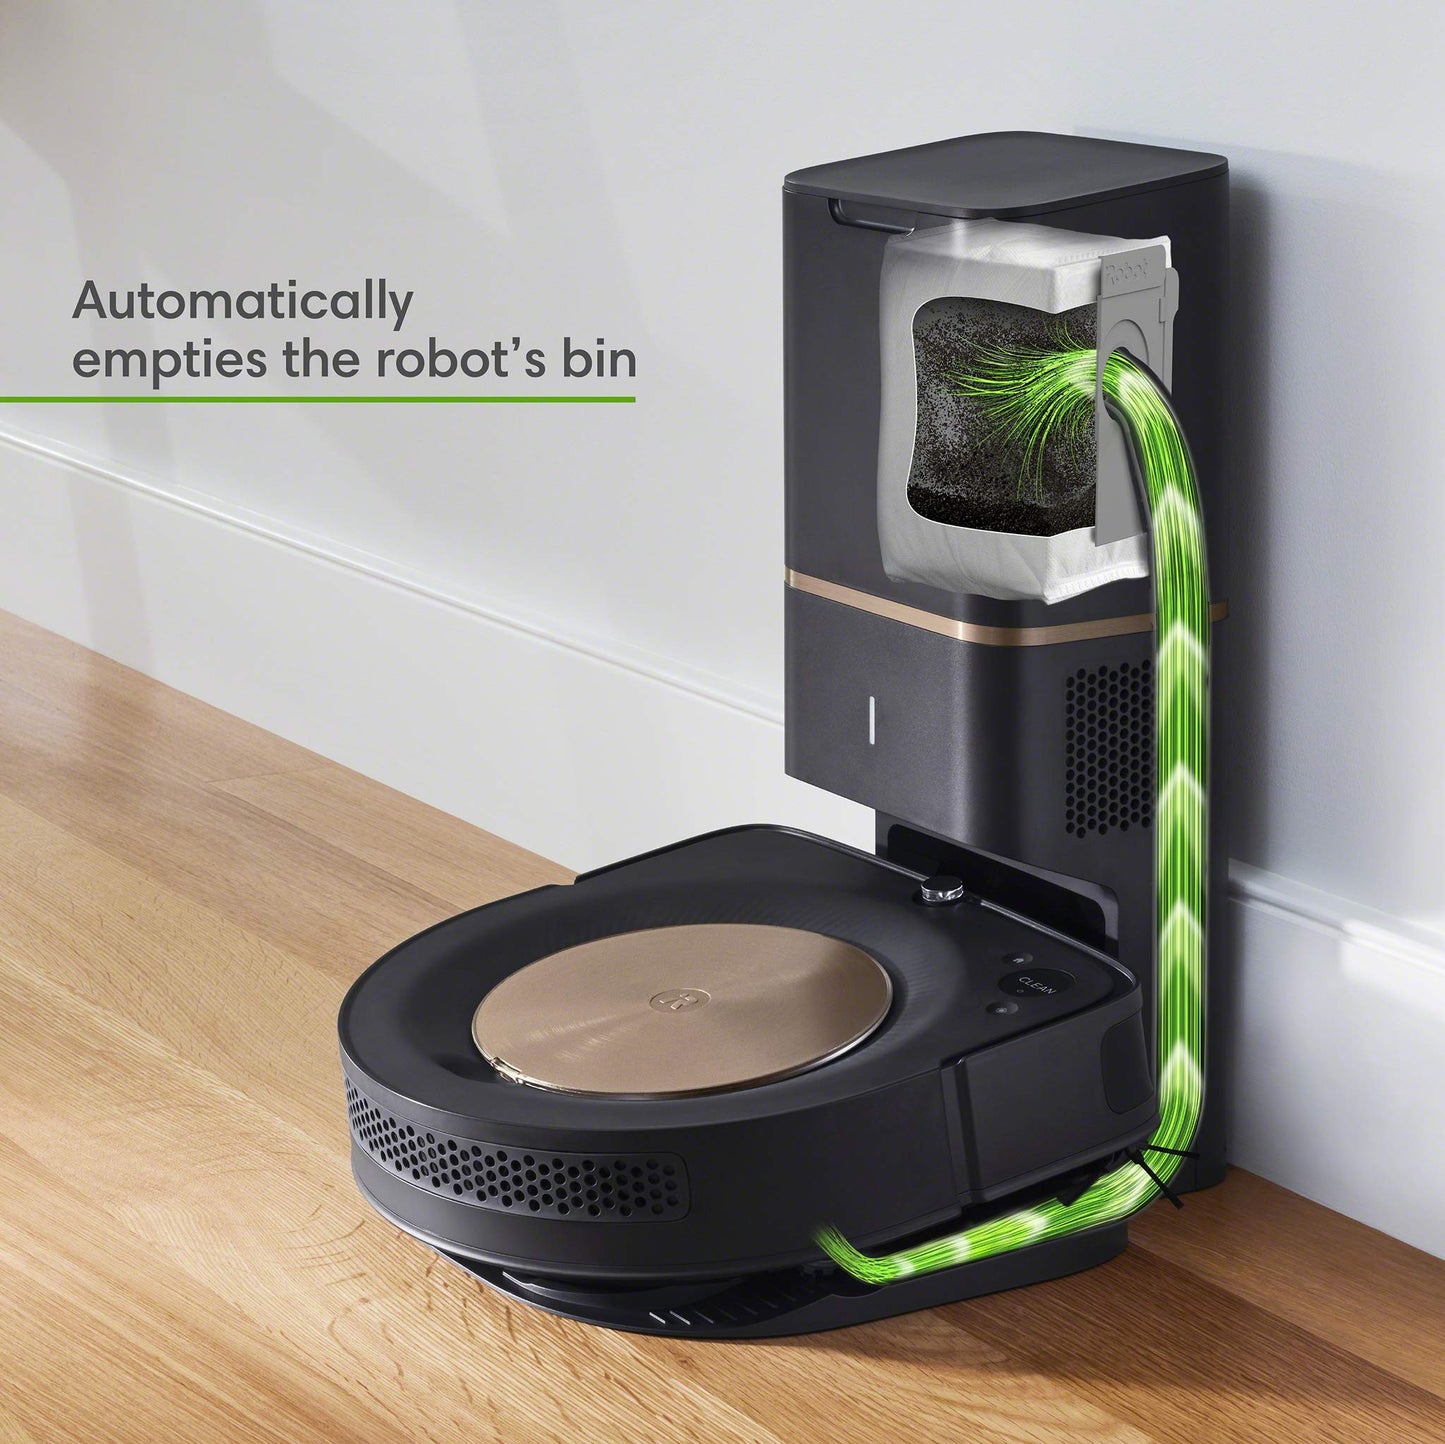 iRobot Roomba s9+ (9550) Robot Vacuum & Braava Jet m6 (6112) Robot Mop Bundle - Wi-Fi Connected, Smart Mapping, Powerful Suction, Precision Jet Spray, Corners & Edges, Ideal for Multiple Rooms